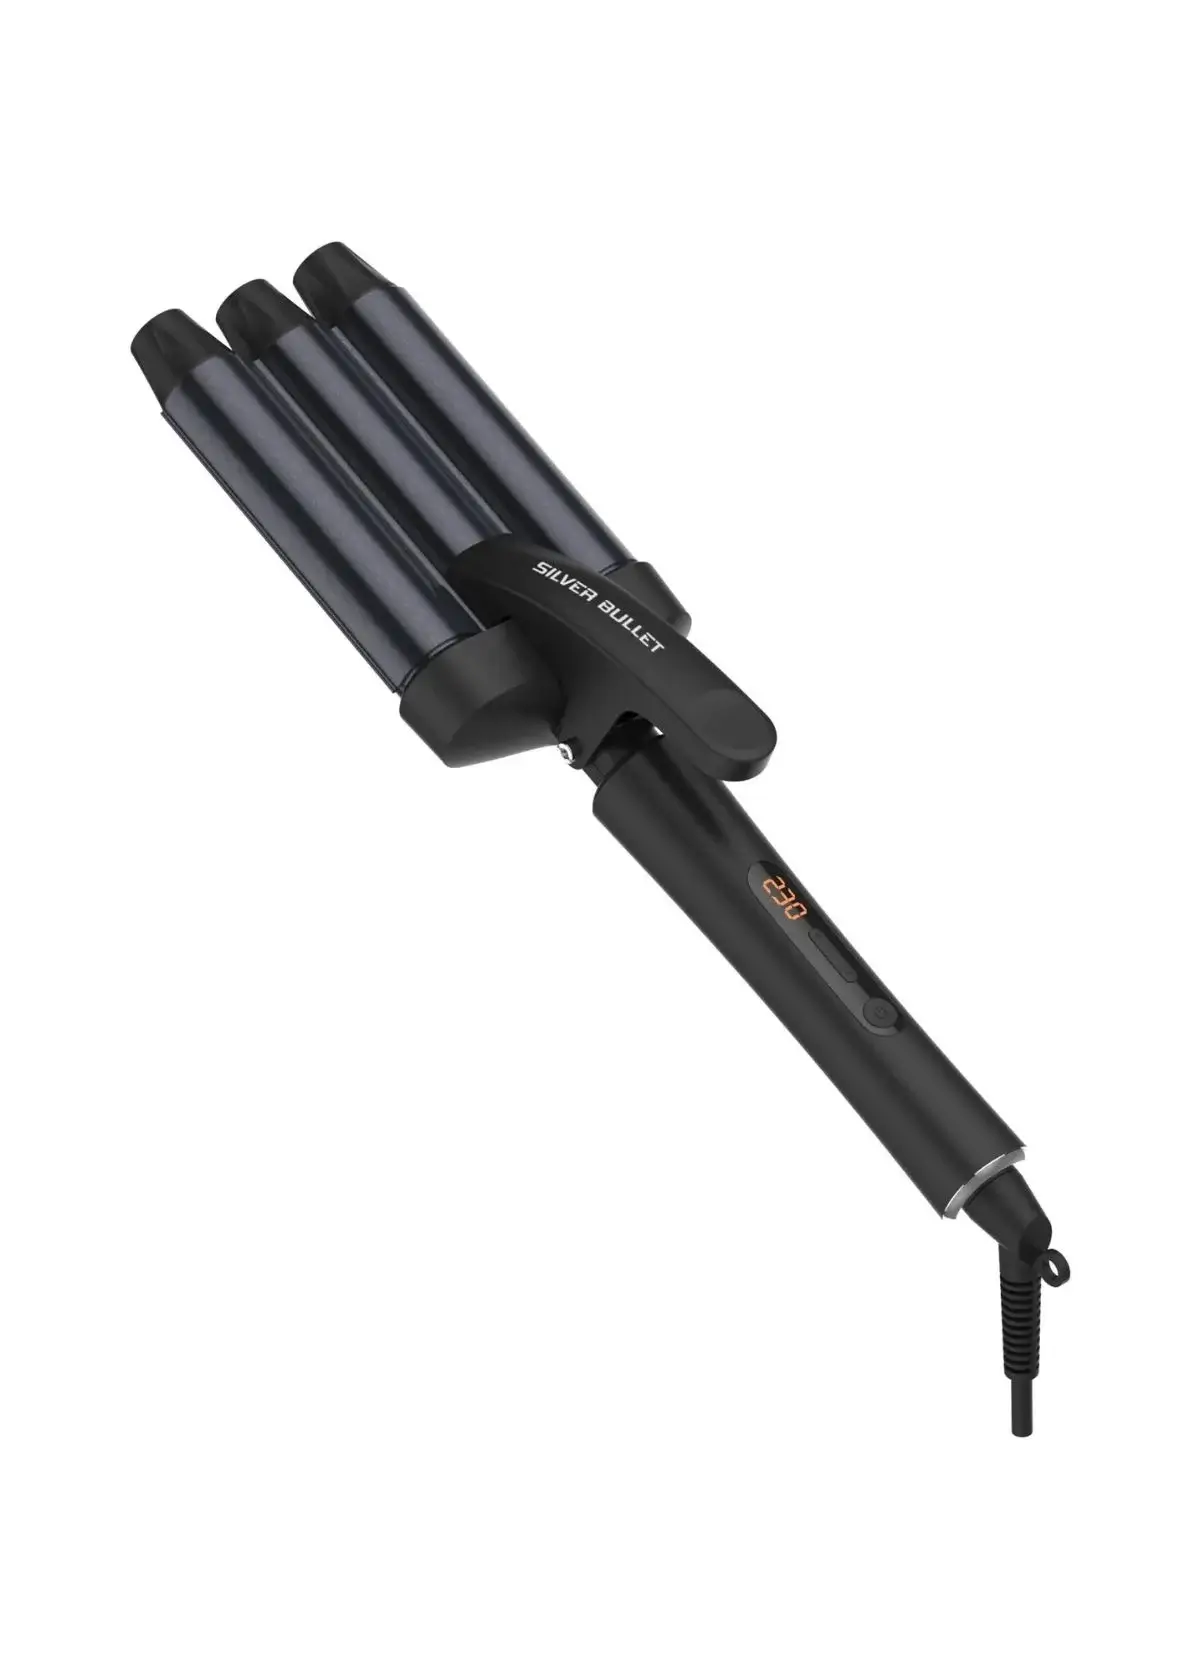 What is a triple barrel curling iron?